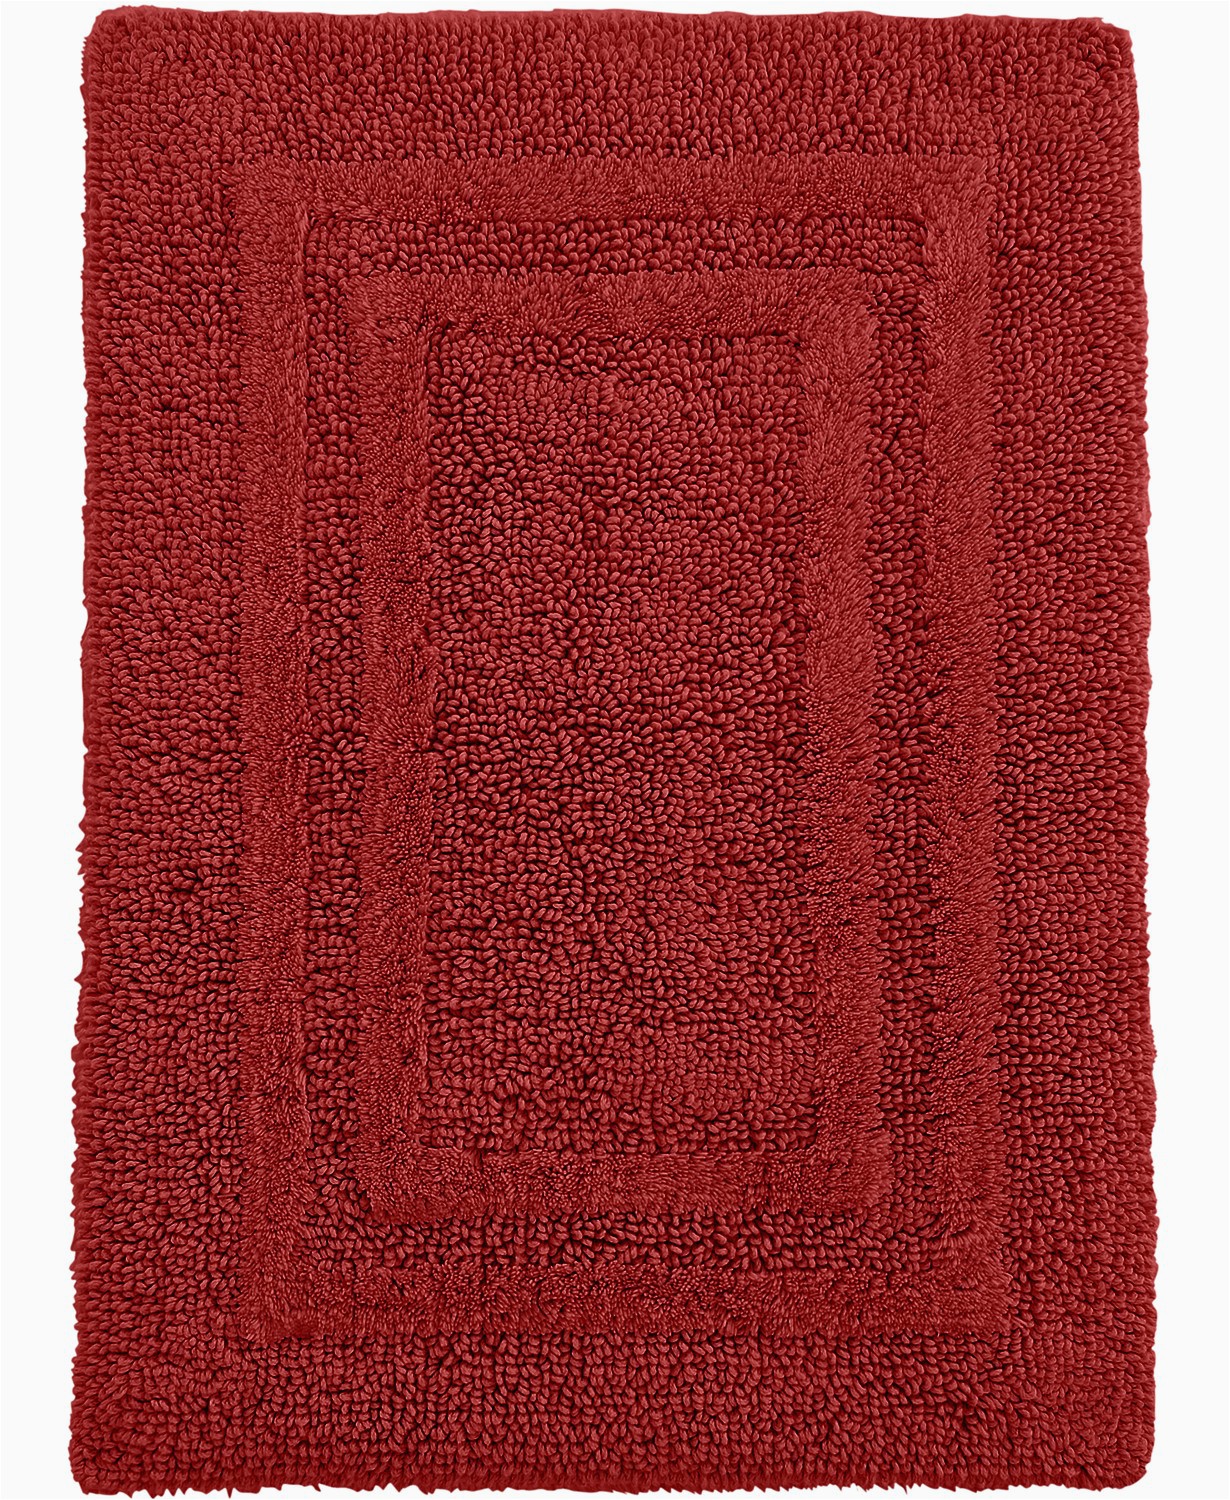 Hotel Collection Reversible Bath Rug Hotel Collection Cotton Super soft Reversible Bath Rug with Eight Understated Hues to Match Any Bath Décor 27 Inch by 48 Inch Red